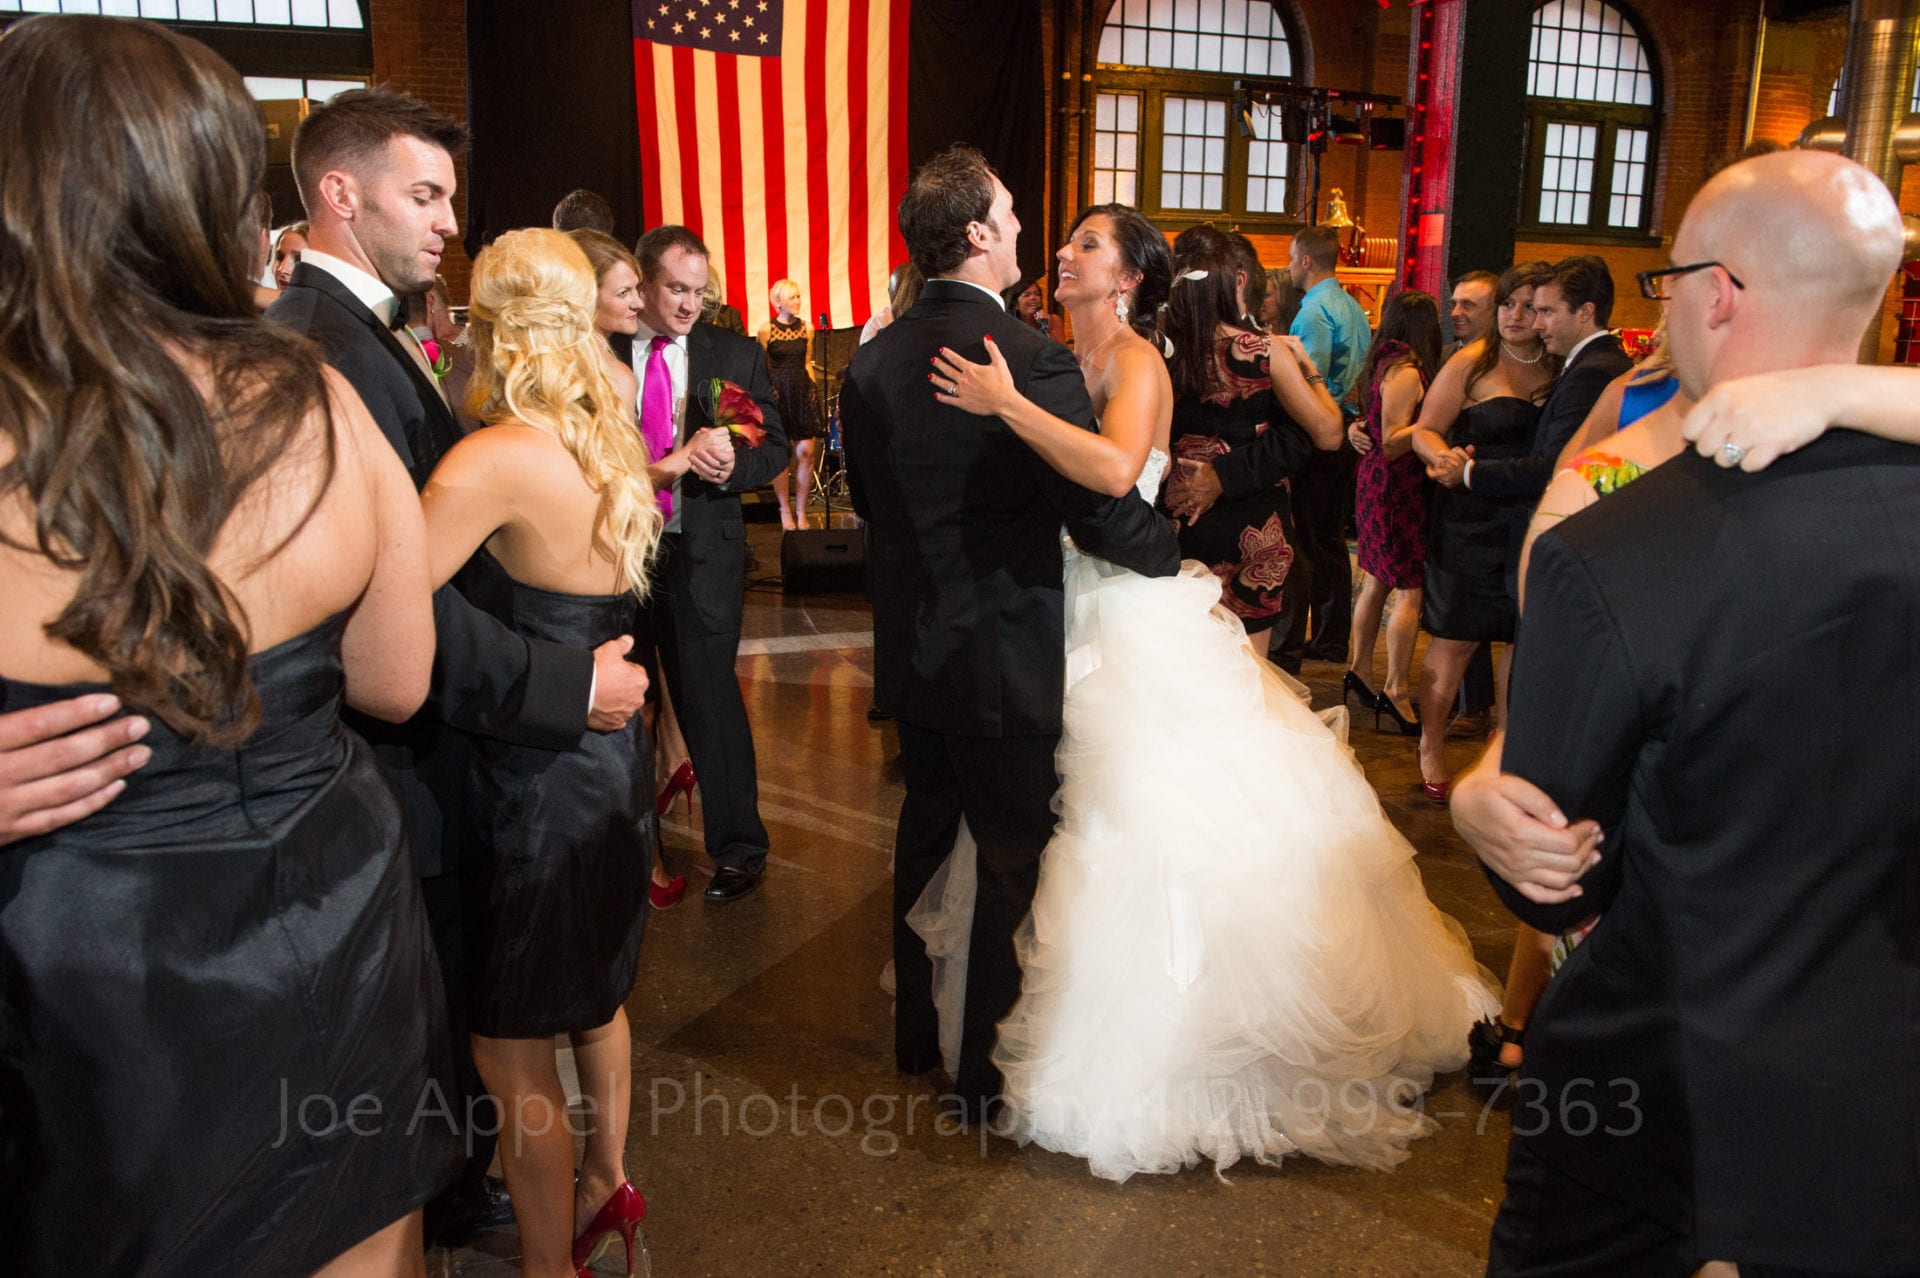 A bride and groom dance in front of a large American flag while other couples fill the dance floor around them.